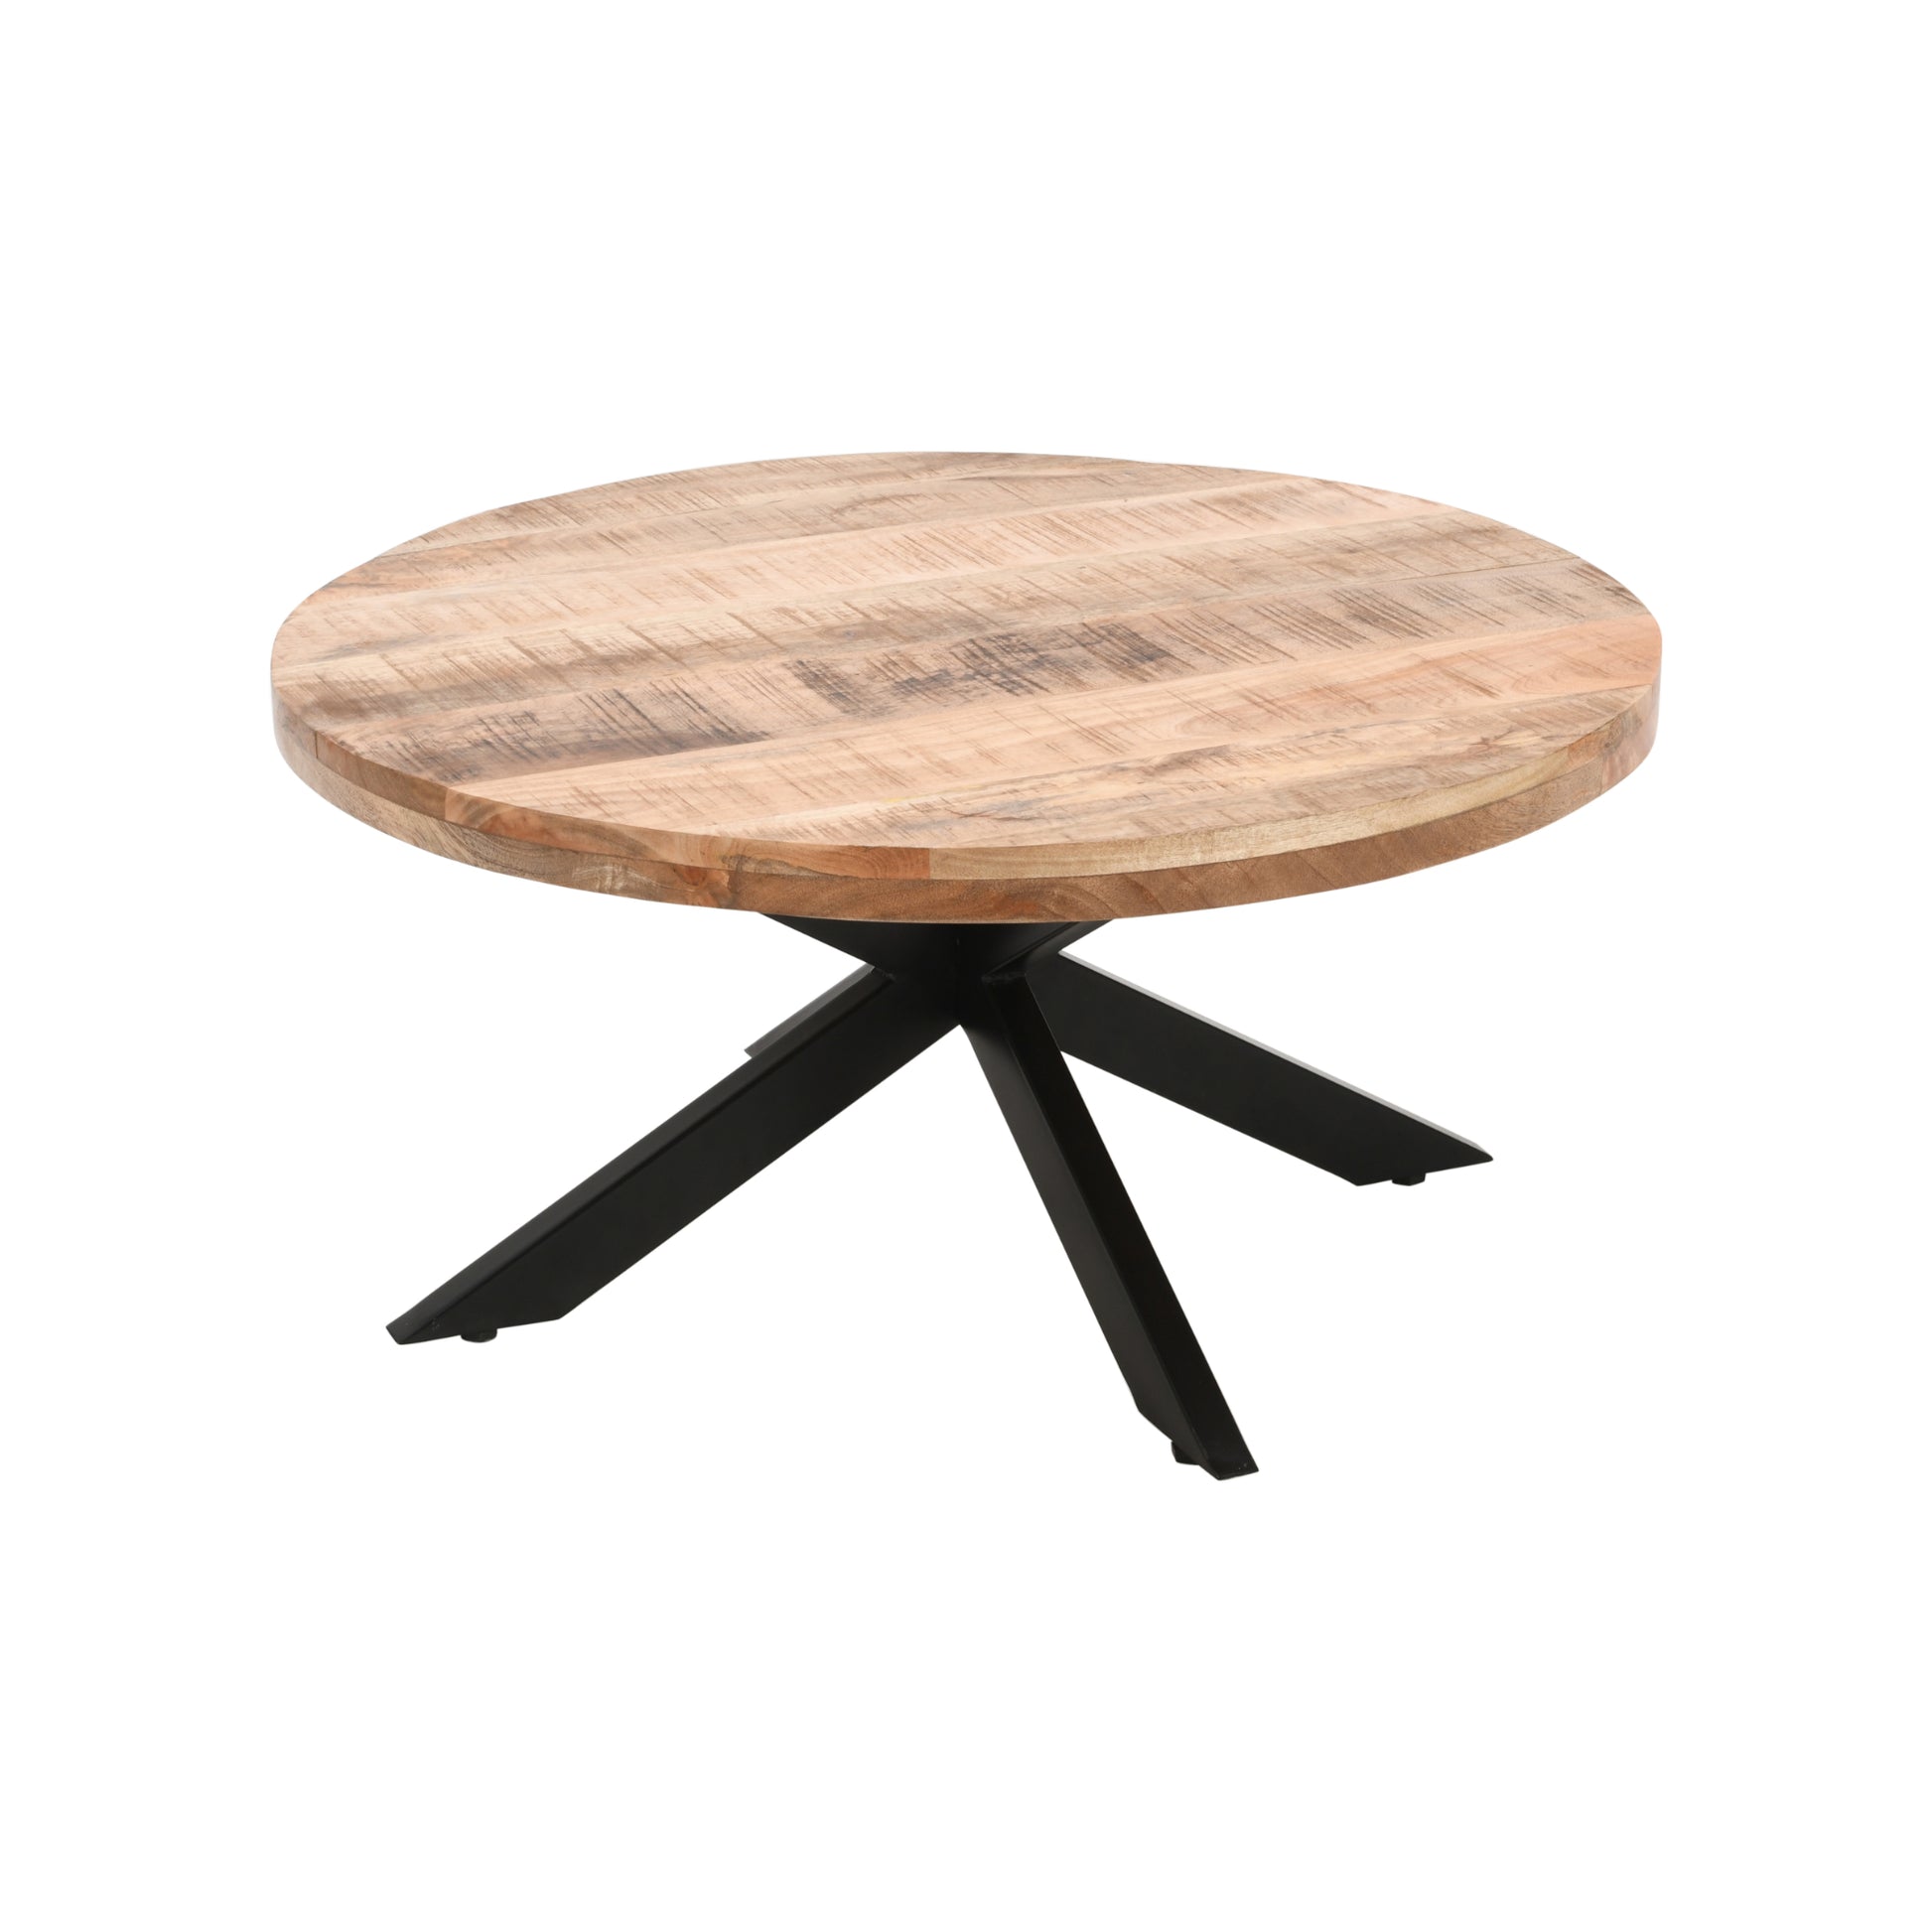 Surrey Solid Wood Coffee Table With Metal Spider Legs